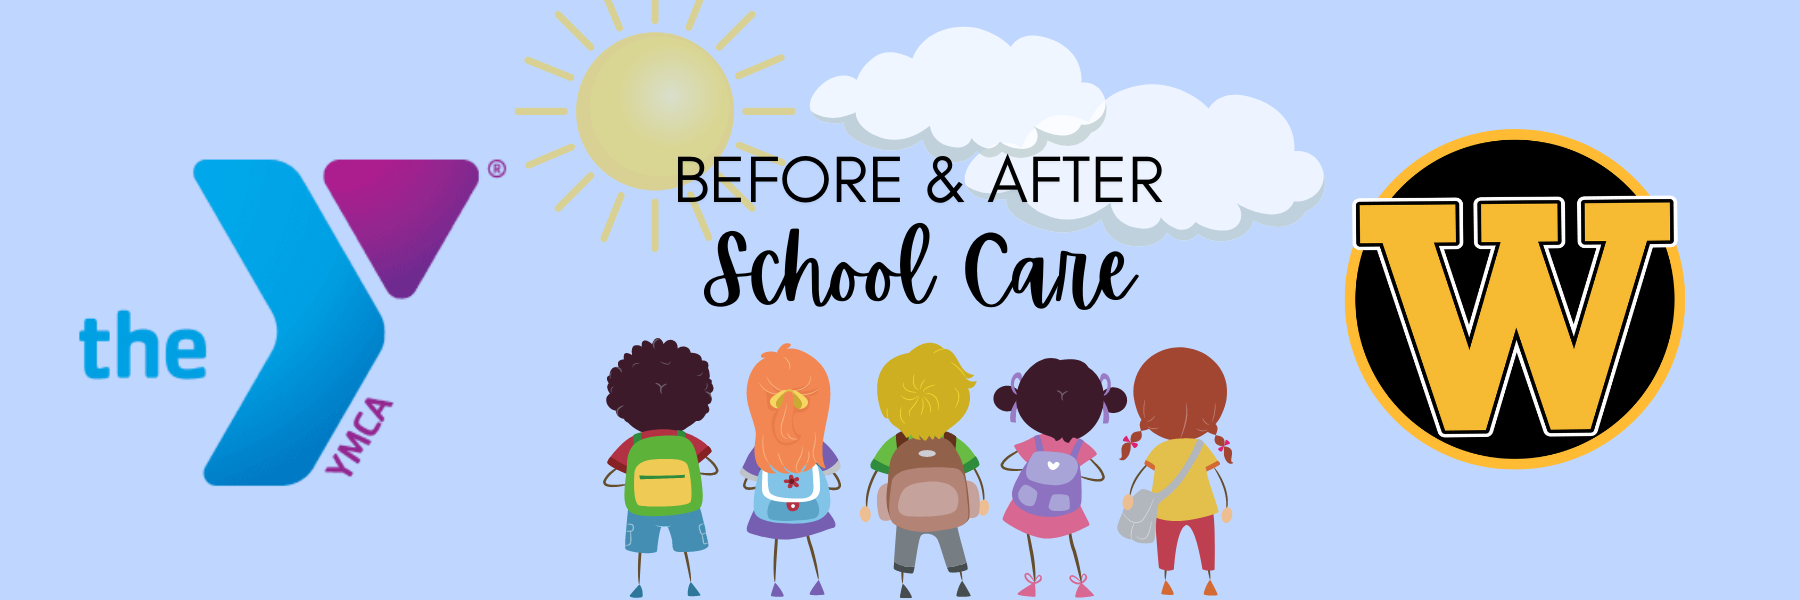 before and after school care